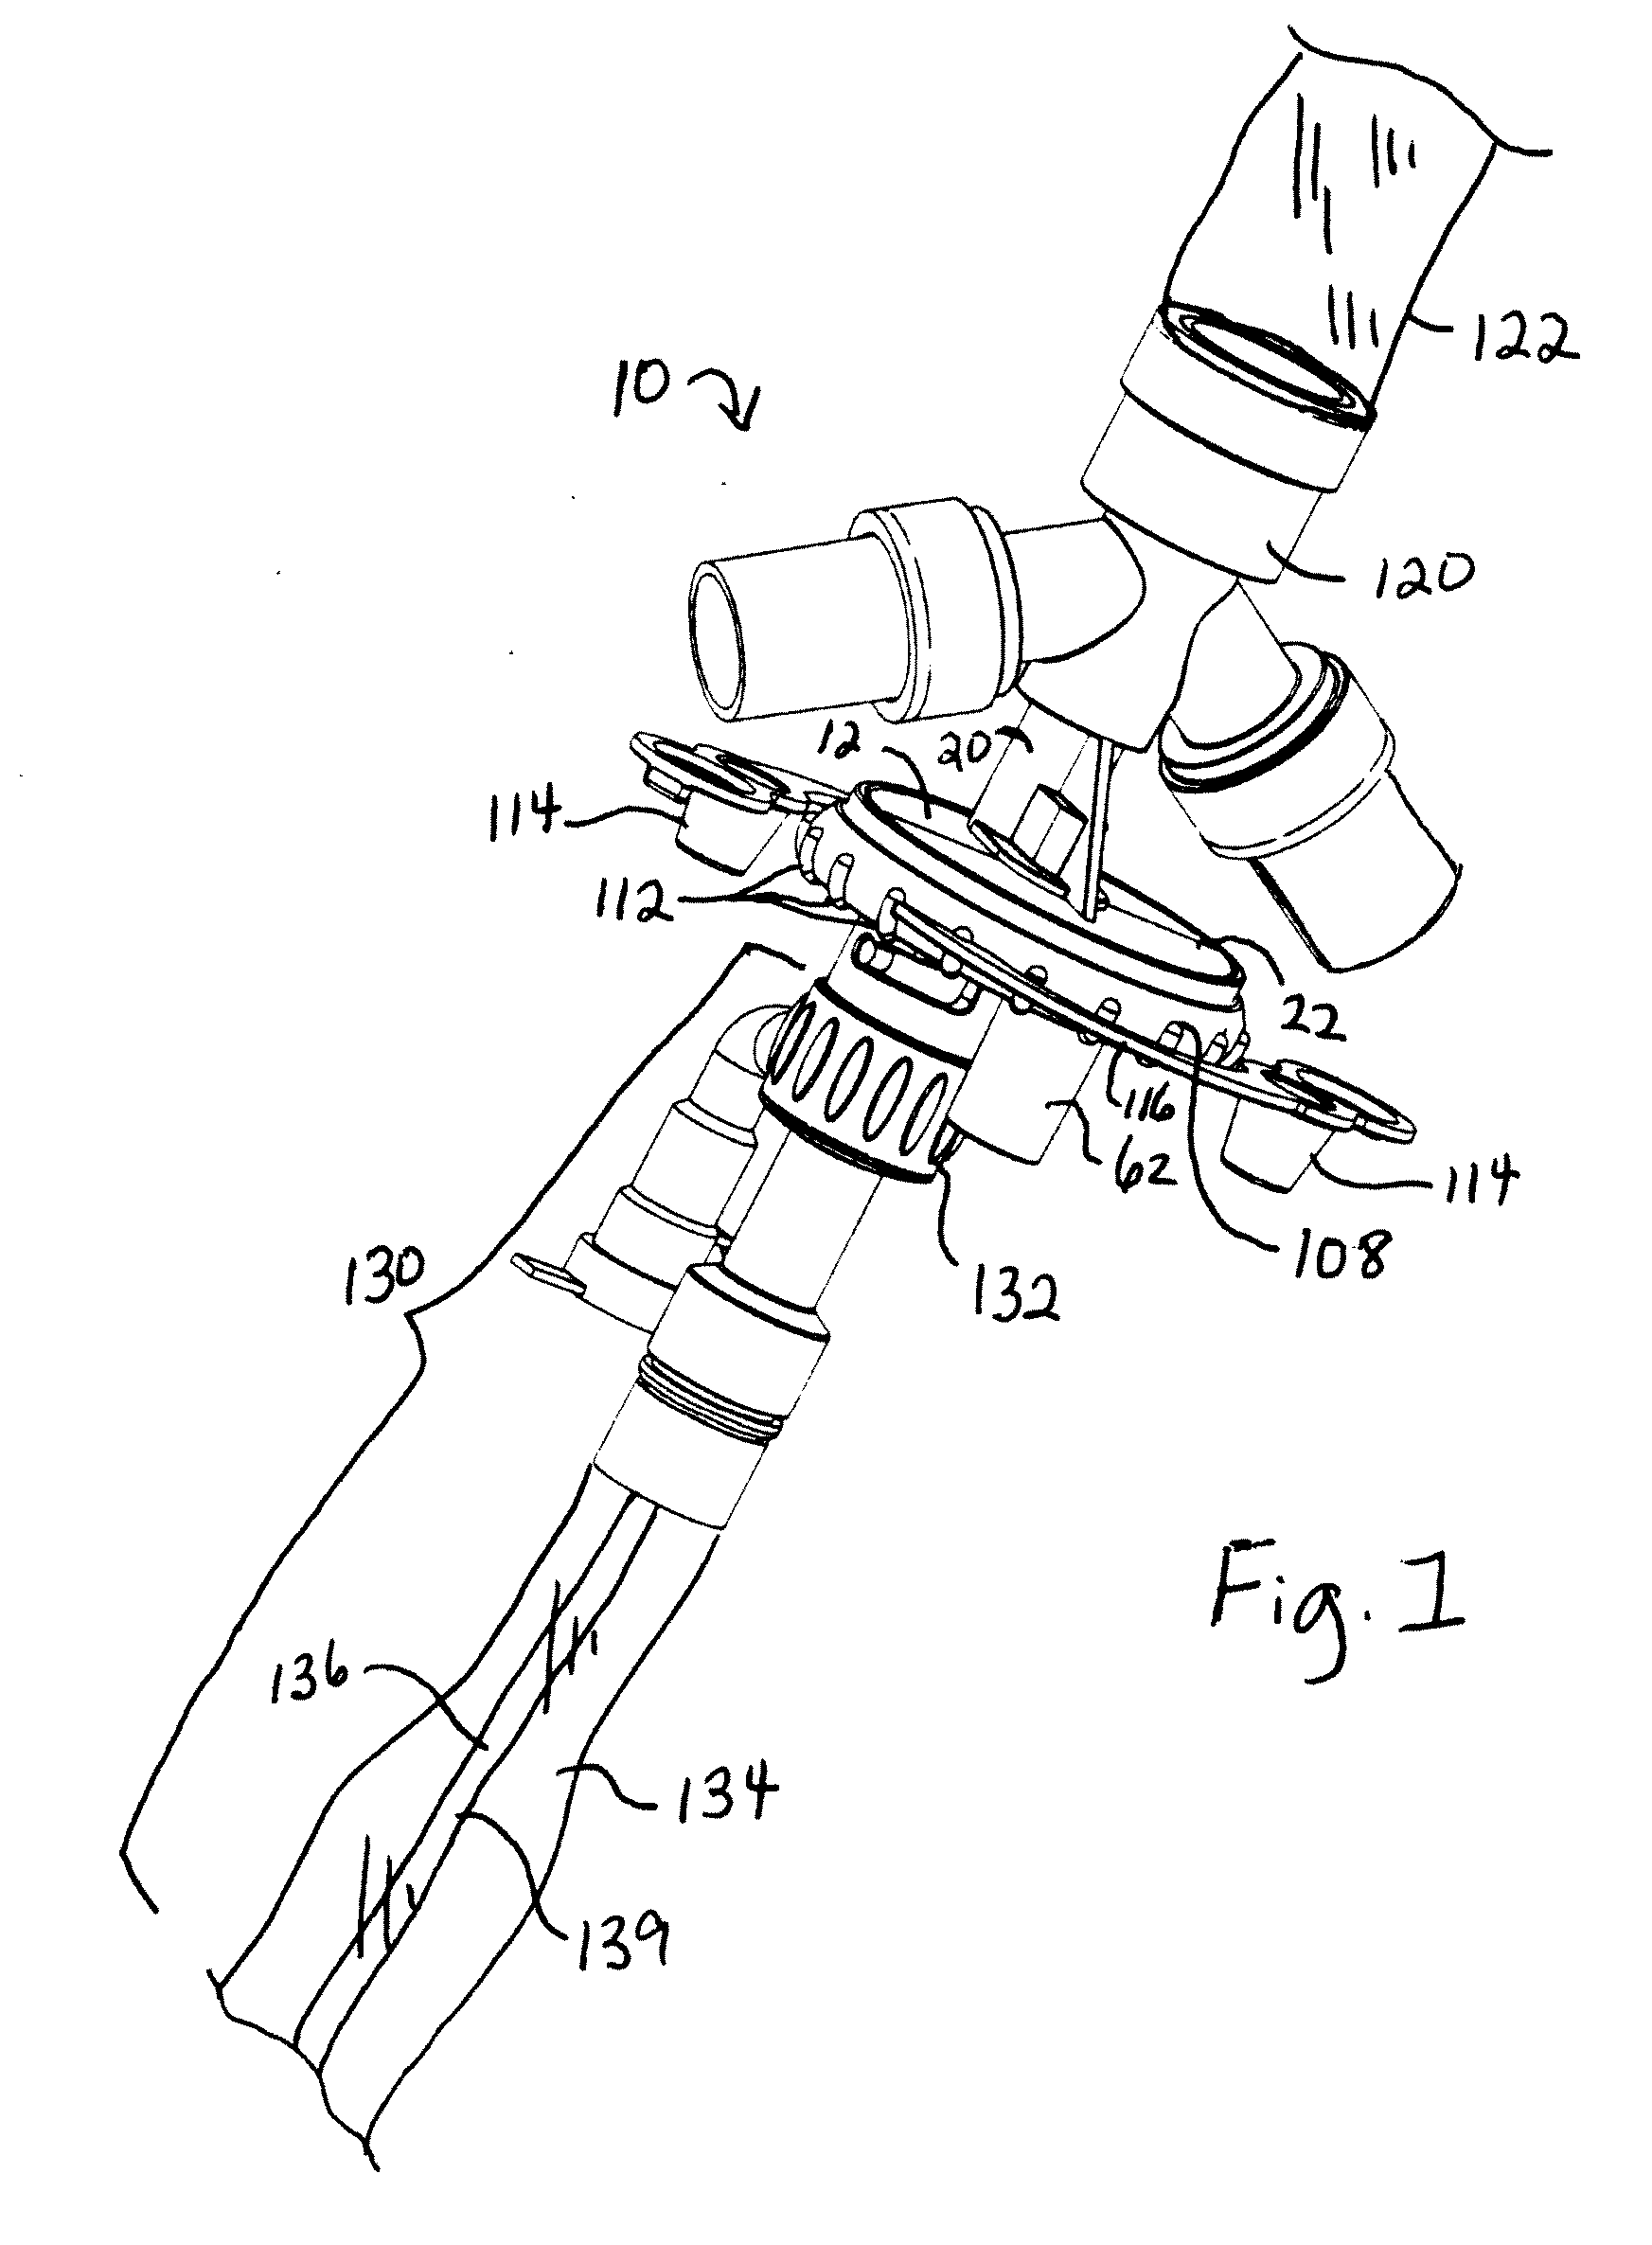 Respiratory Access Port Assembly With Passive Lock And Method Of Use